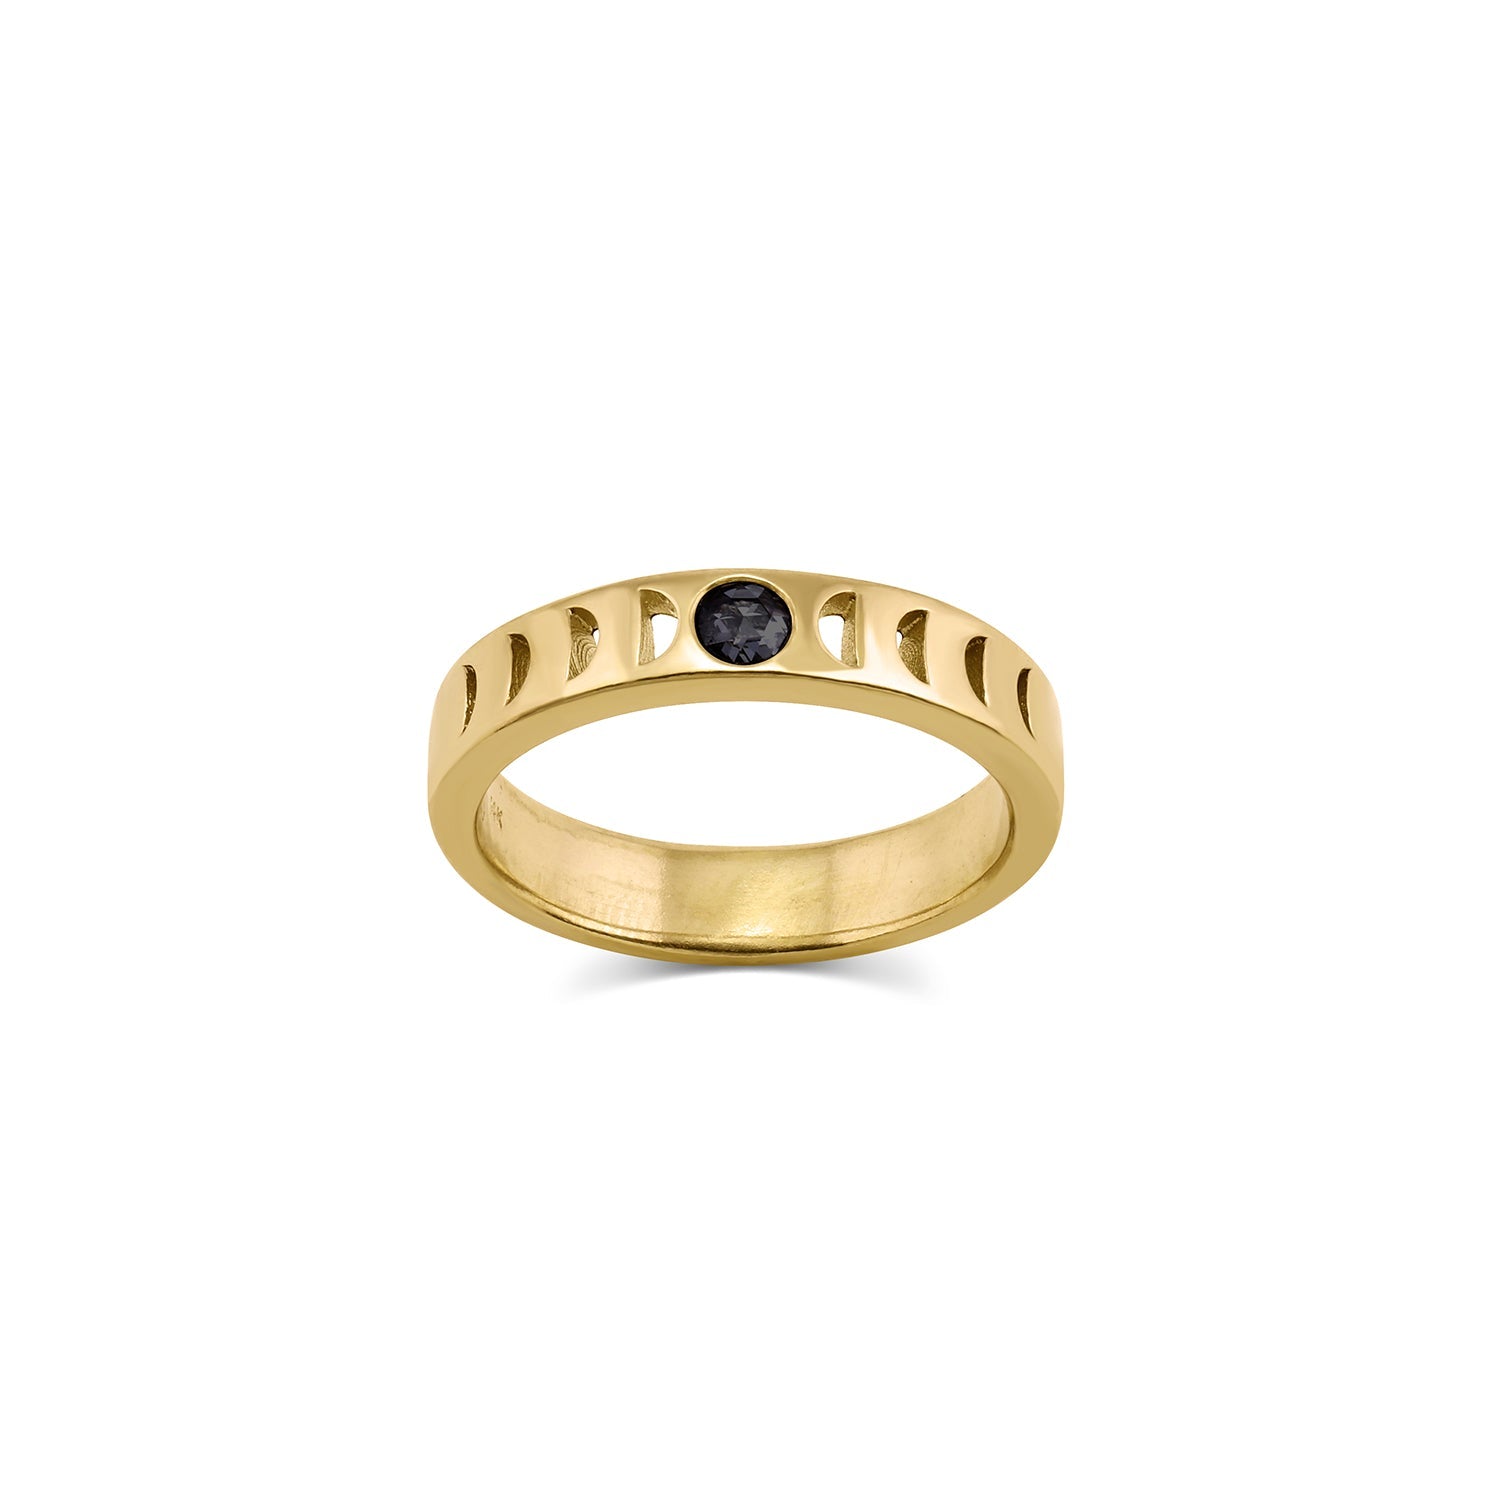 Moon Phase Rings moon phase rings > stacking rings > wedding bands > gender neutral bands > rose cut diamond ring > promise rings >lunar phase ring > moon ring > phases of the moon ring black rose cut diamond / 4 Moon Phase Ring | 4mm wide | gemstones